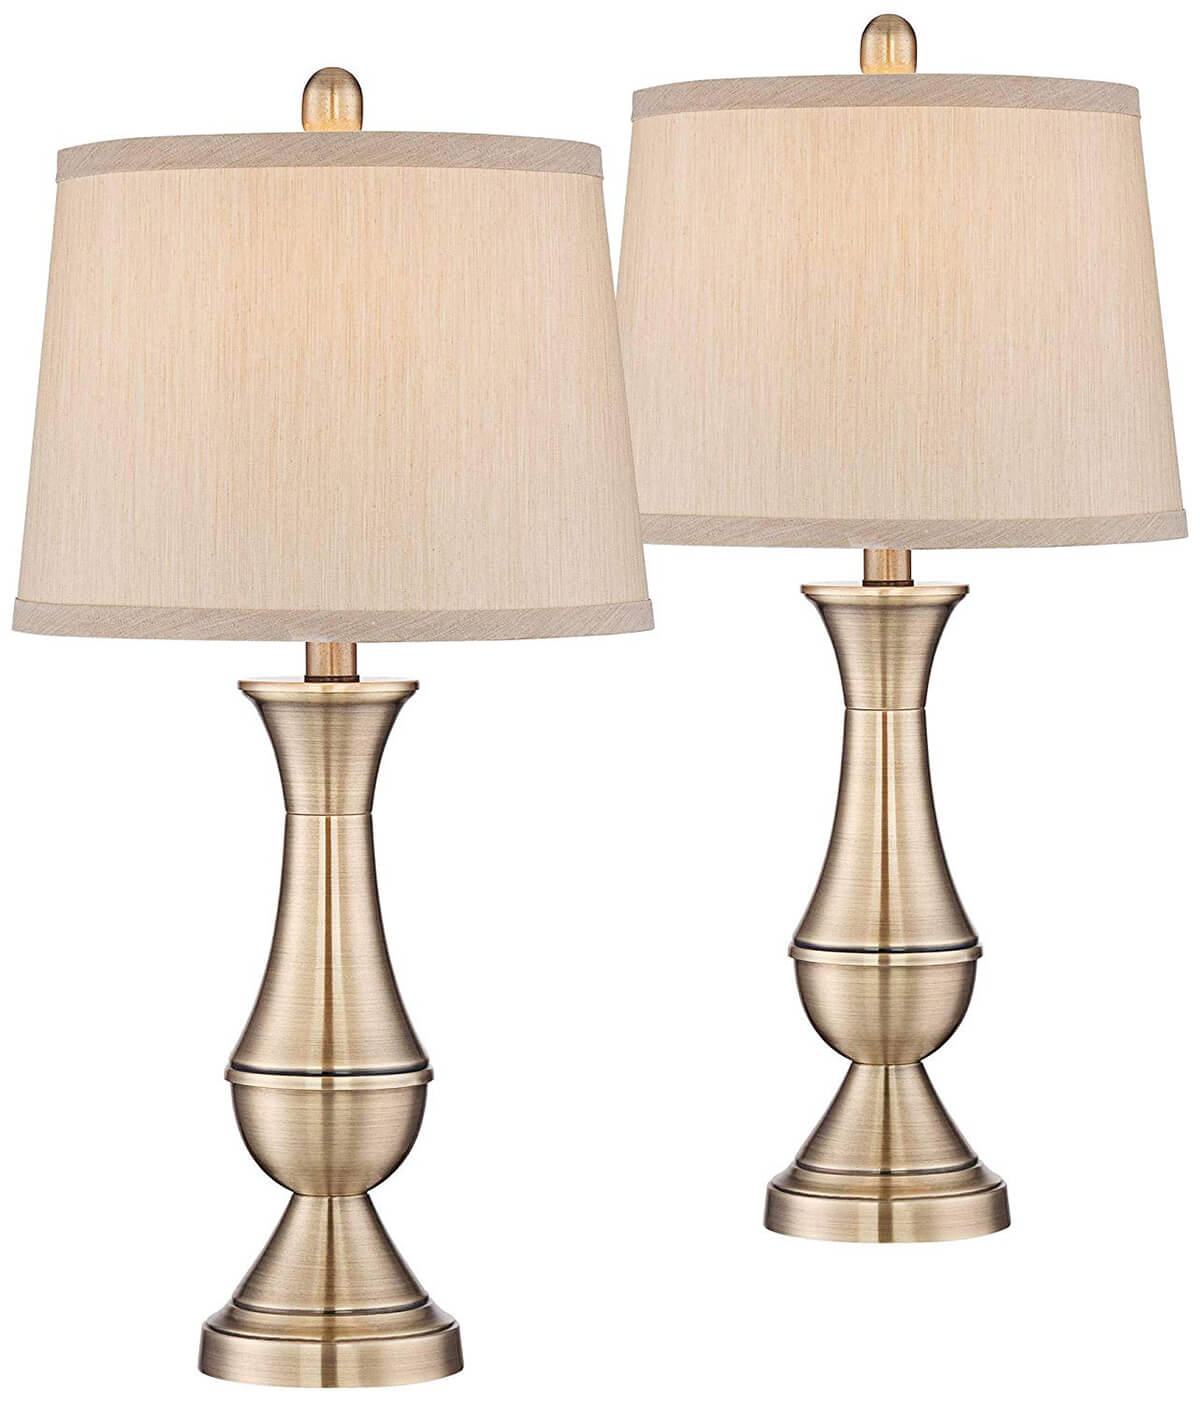 25 Best Bedside Table Lamps To Light Up, Wood Bedside Table Lamps